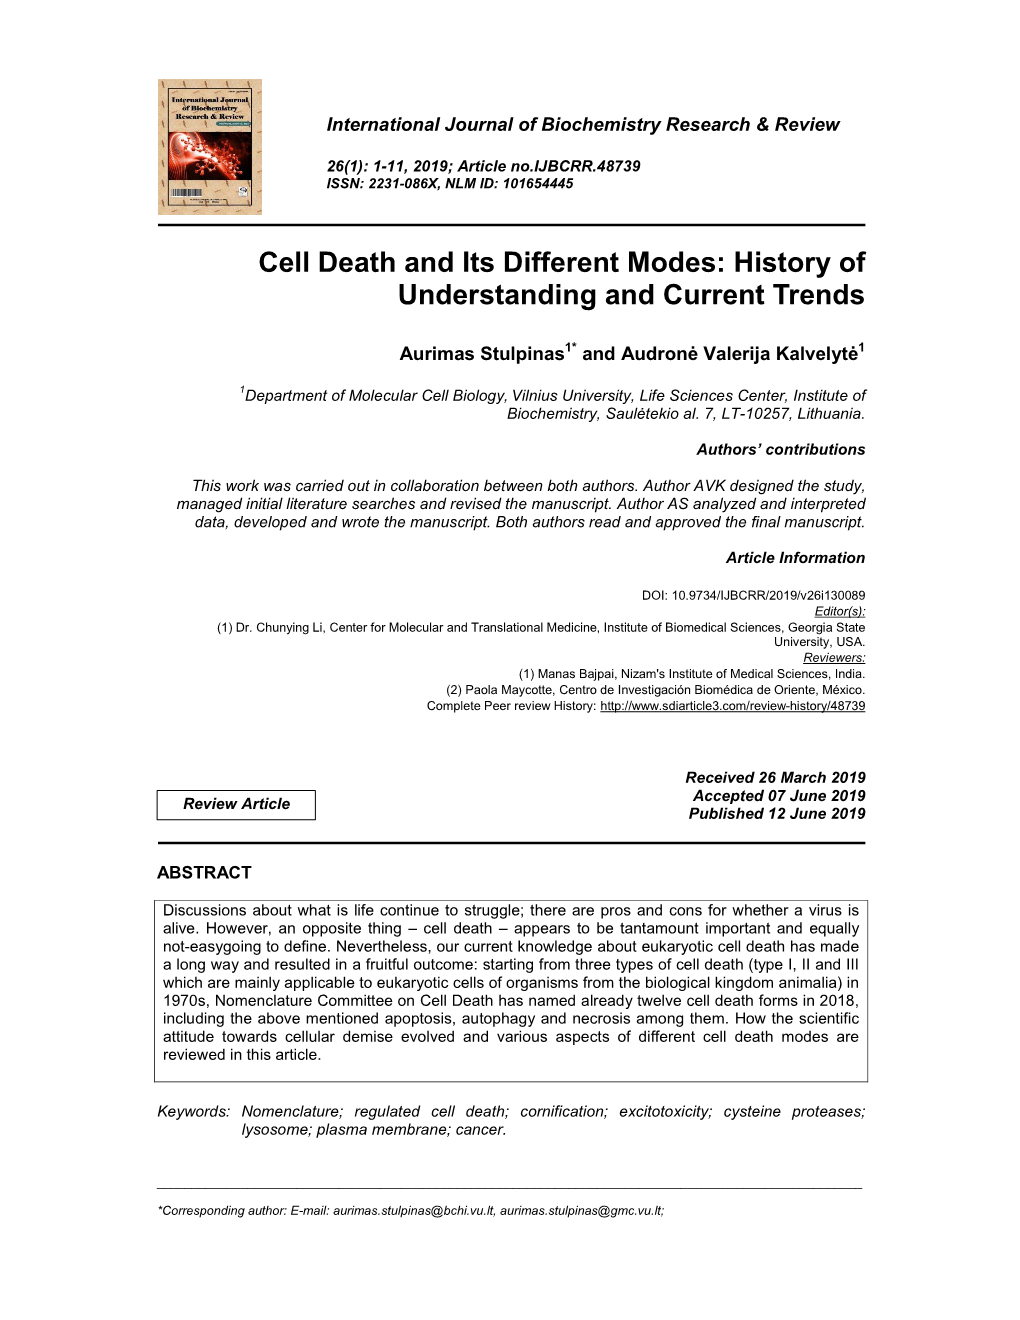 Cell Death and Its Different Modes: History of Understanding and Current Trends